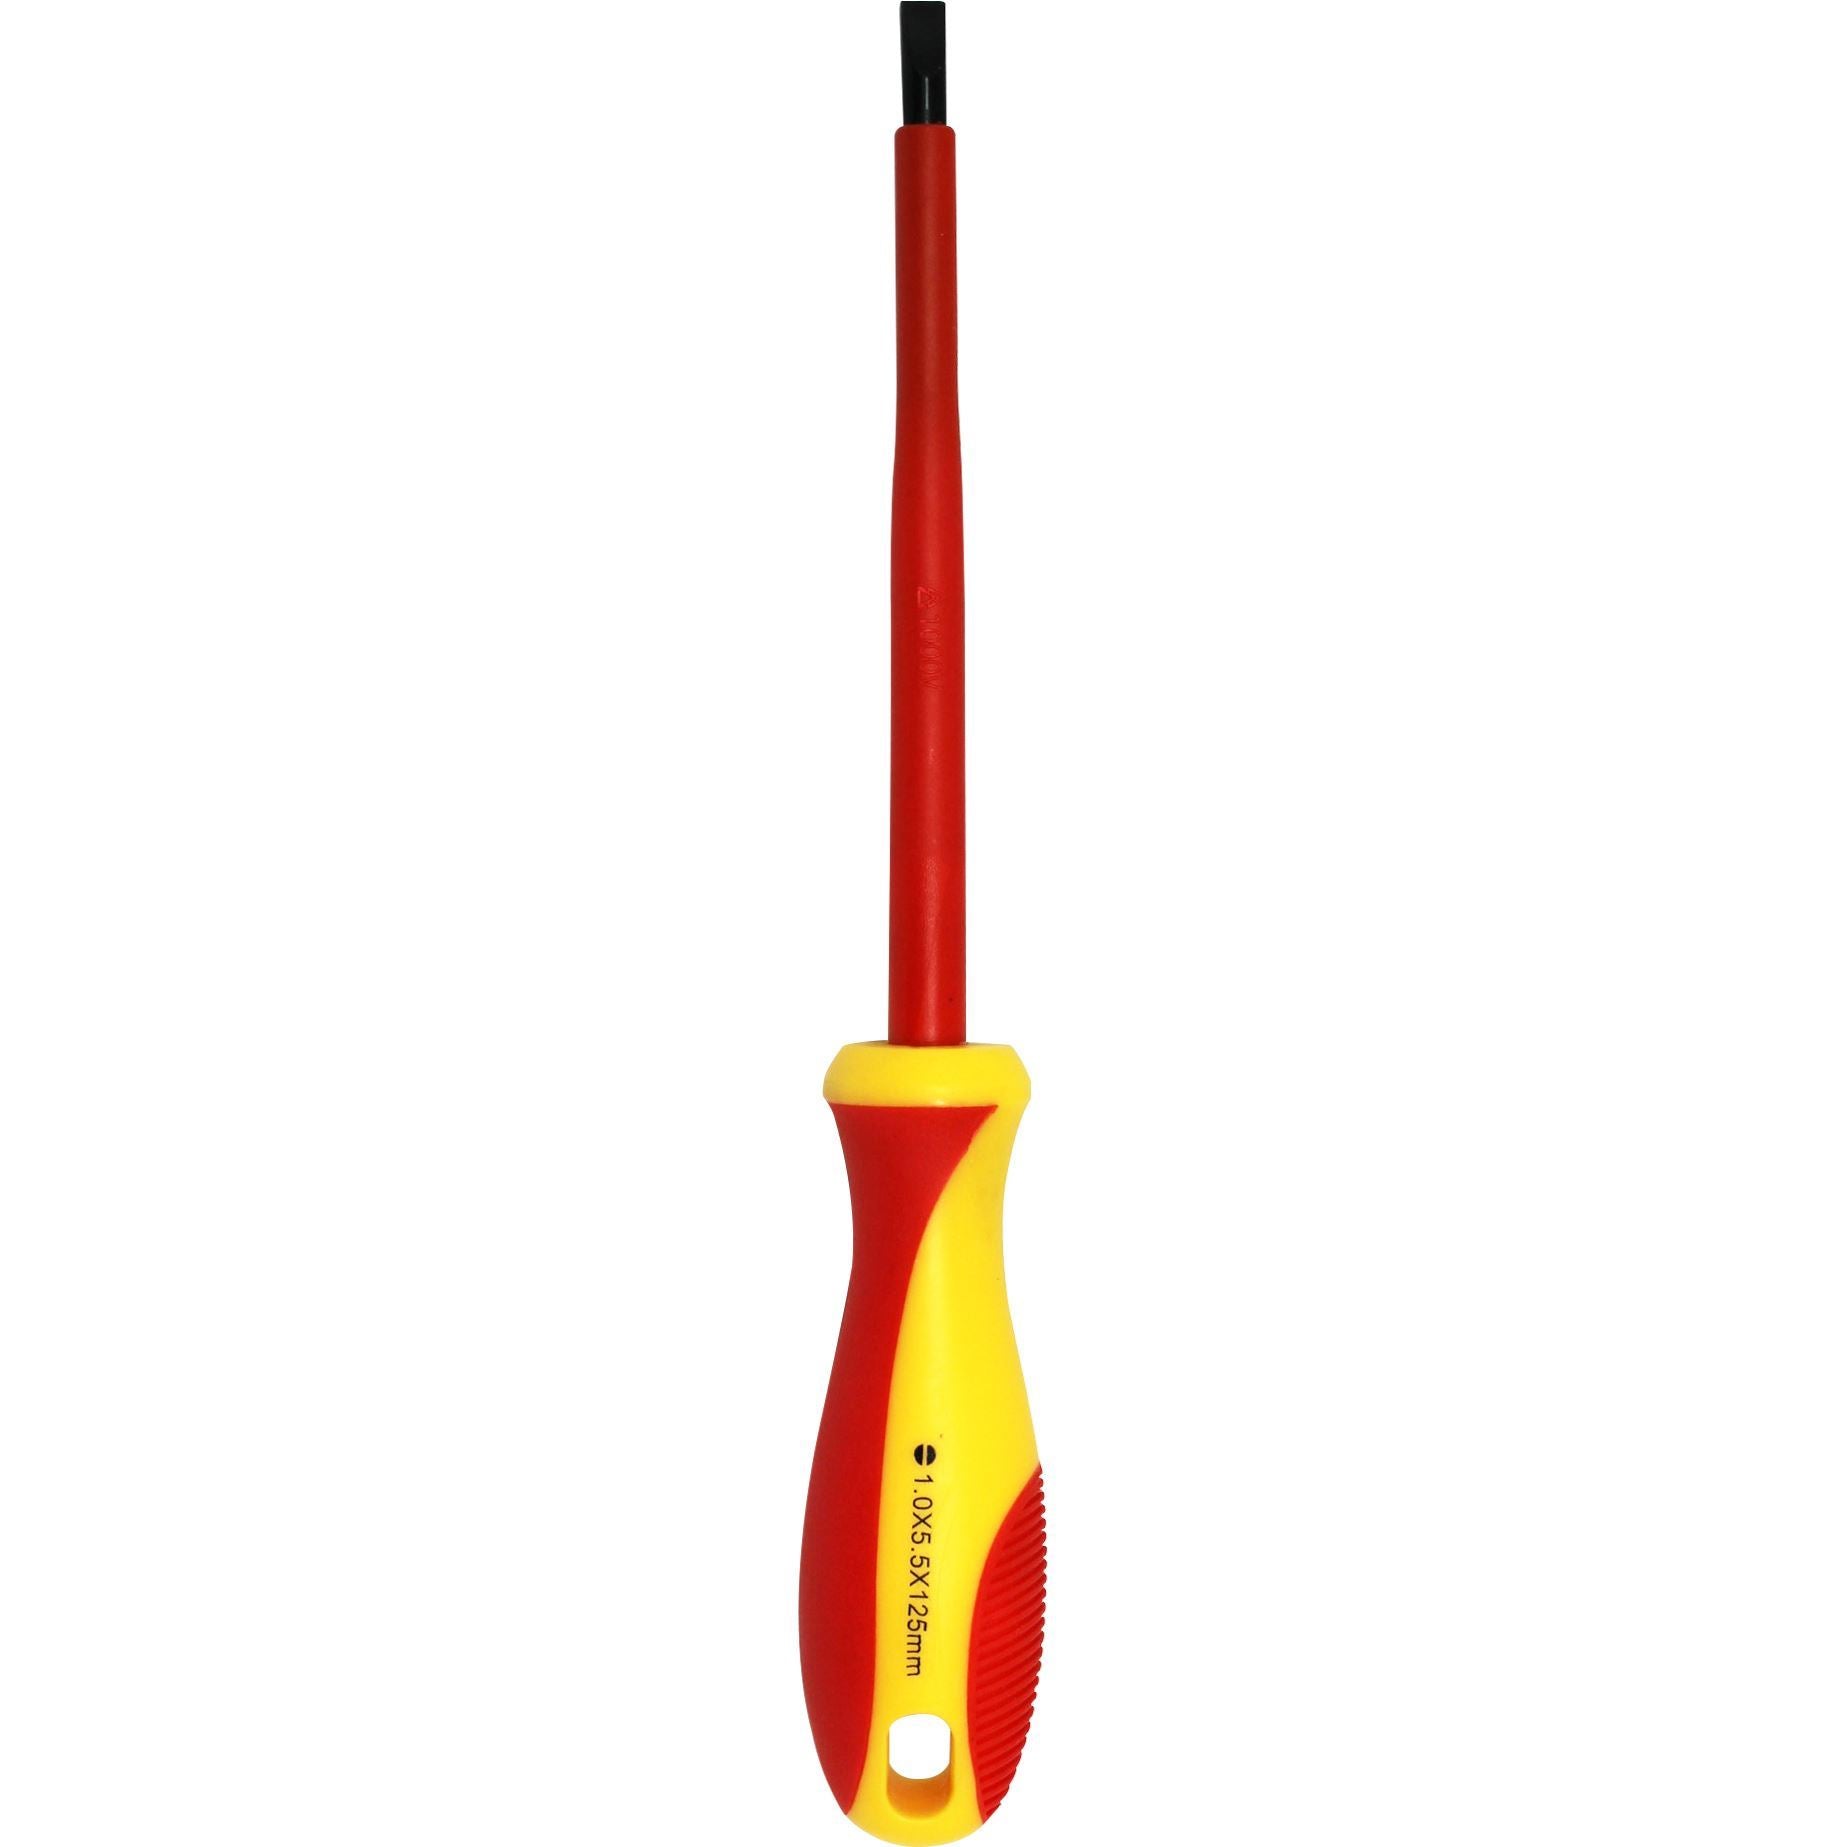 GOLDTOOL_125mm_Electrical_Insulated_VDE_Screwdriver._Tested_to_1000_Volts_AC._(1*5.5*125mm)._Yellow/Red_Colour_Handle